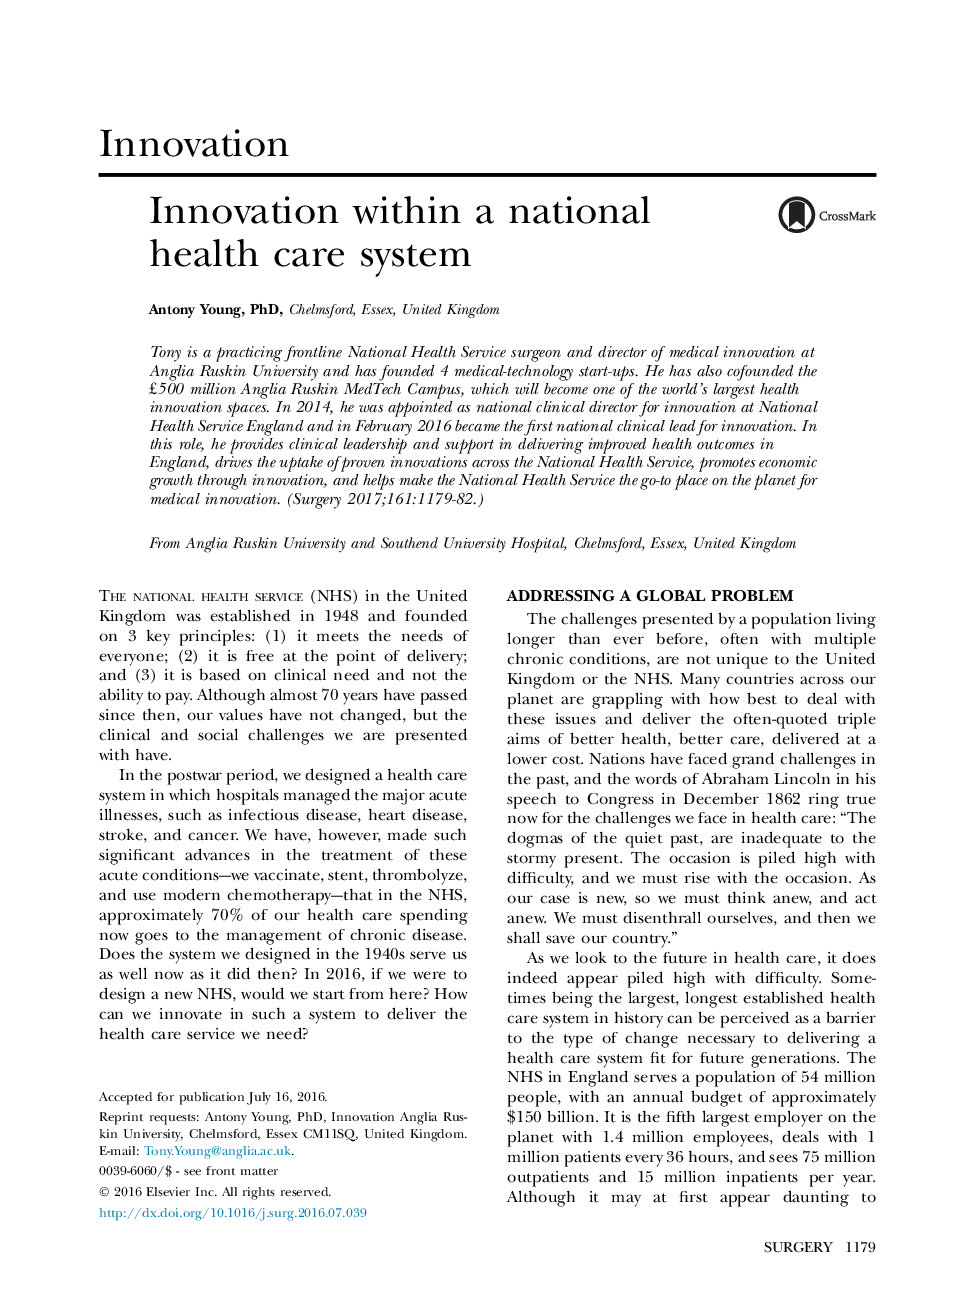 InnovationInnovation within a national health care system